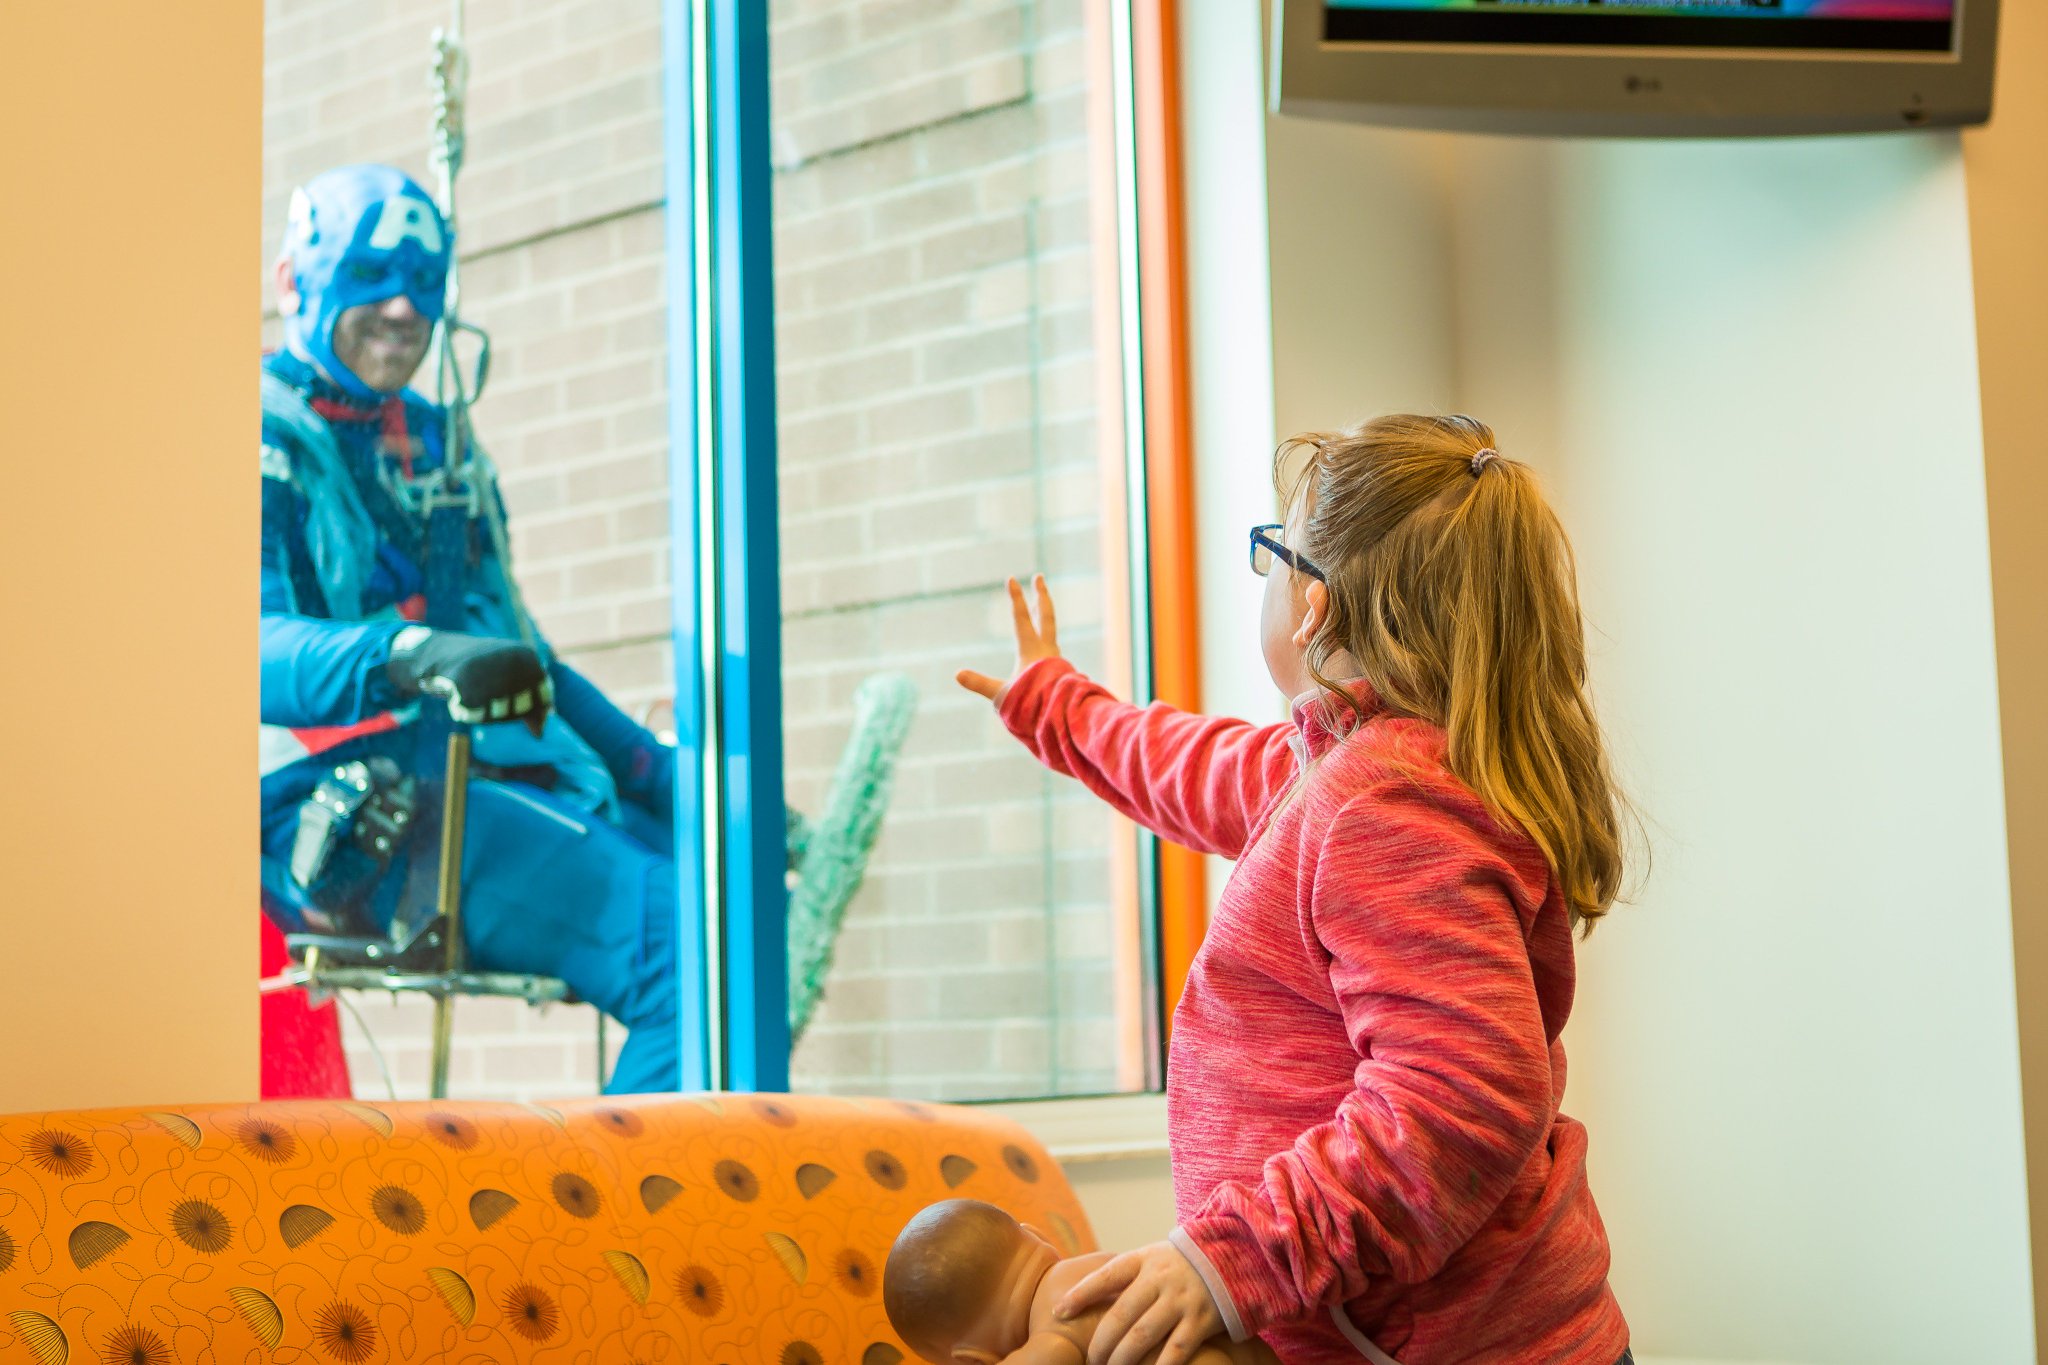 When the boss of Allegheny Window Cleaning Inc. saw Superheroes cleaning the window of a children’s hospital in the UK, it inspired him to do the same in Pittsburgh.